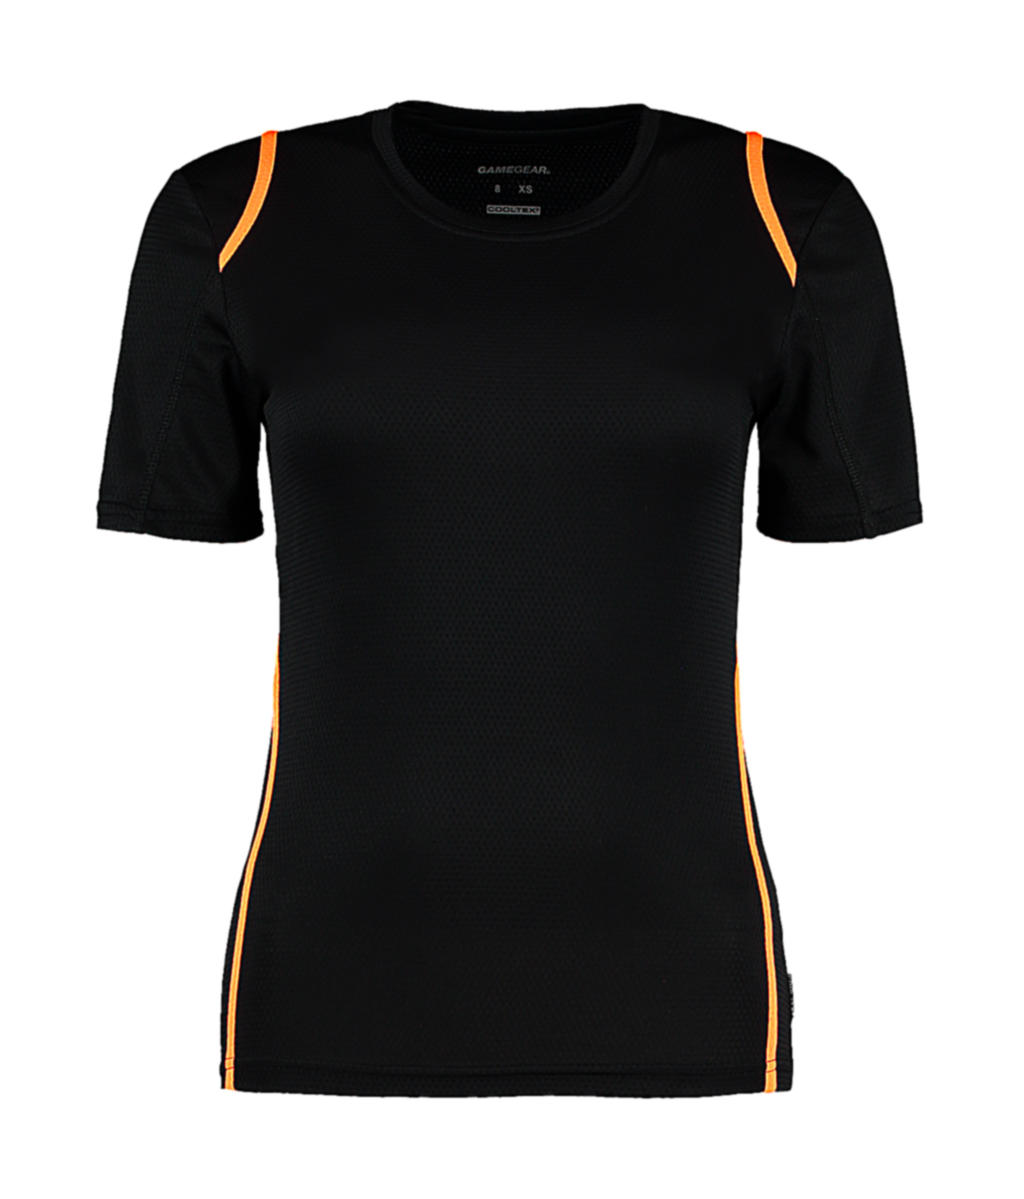  Womens Regular Fit Cooltex? Contrast Tee in Farbe Black/Fluorescent Orange